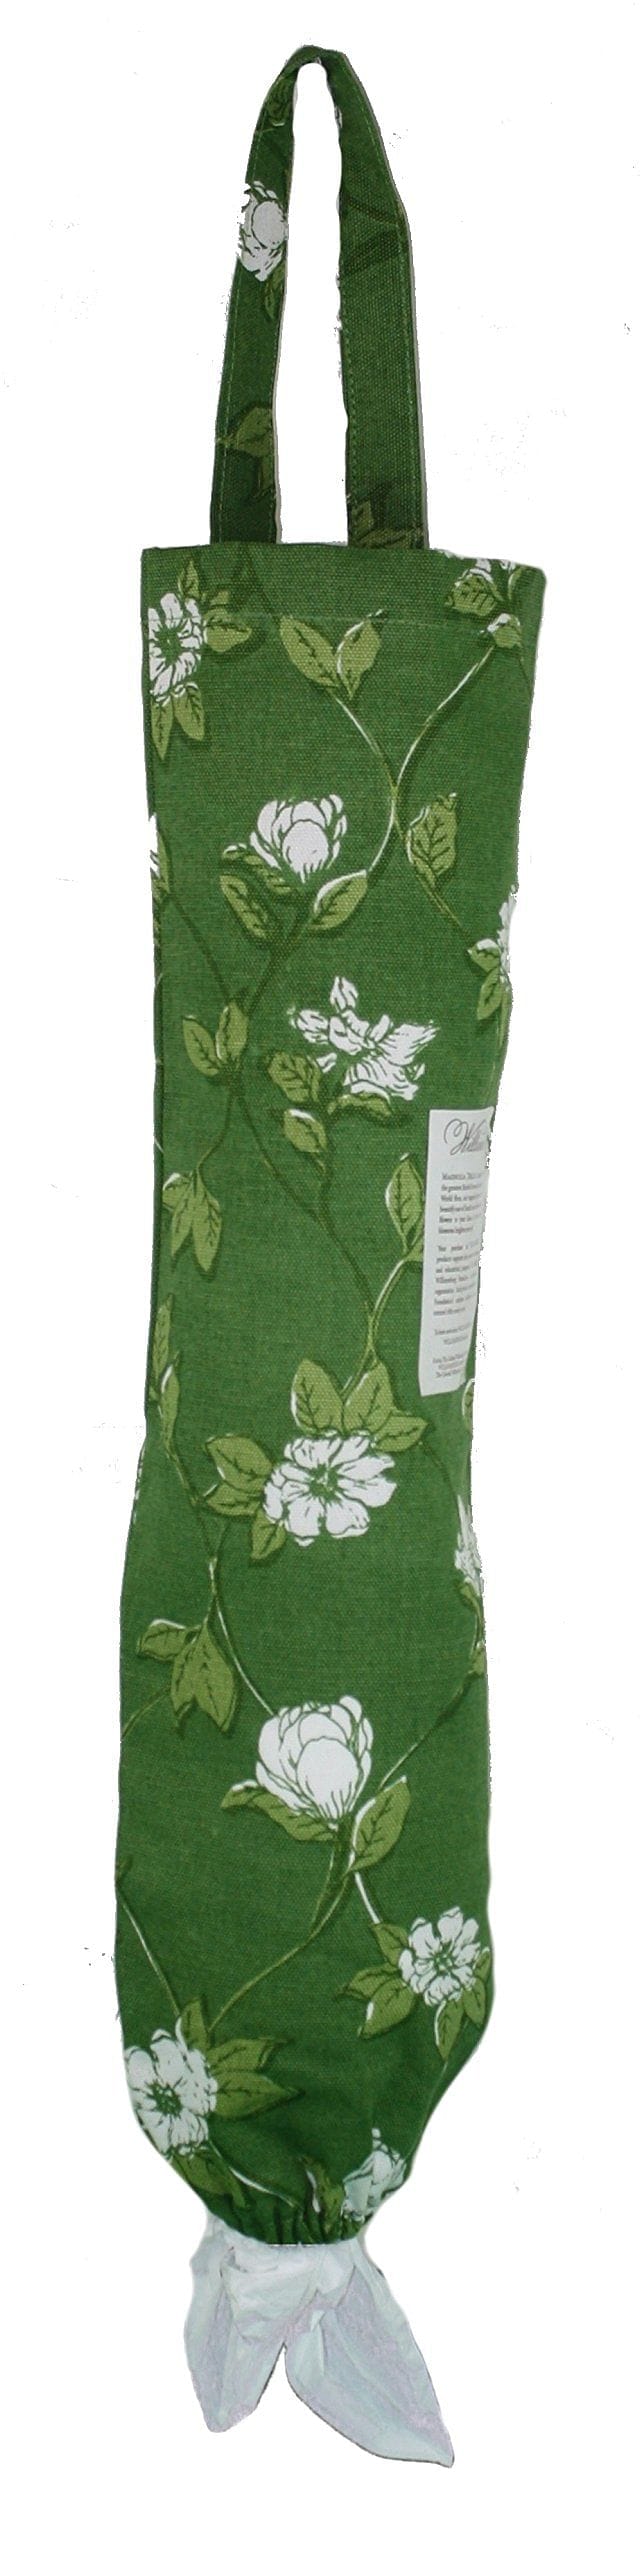 India Overseas Magnolia Trellis Linens From The Williamsburg Collection - - Shelburne Country Store